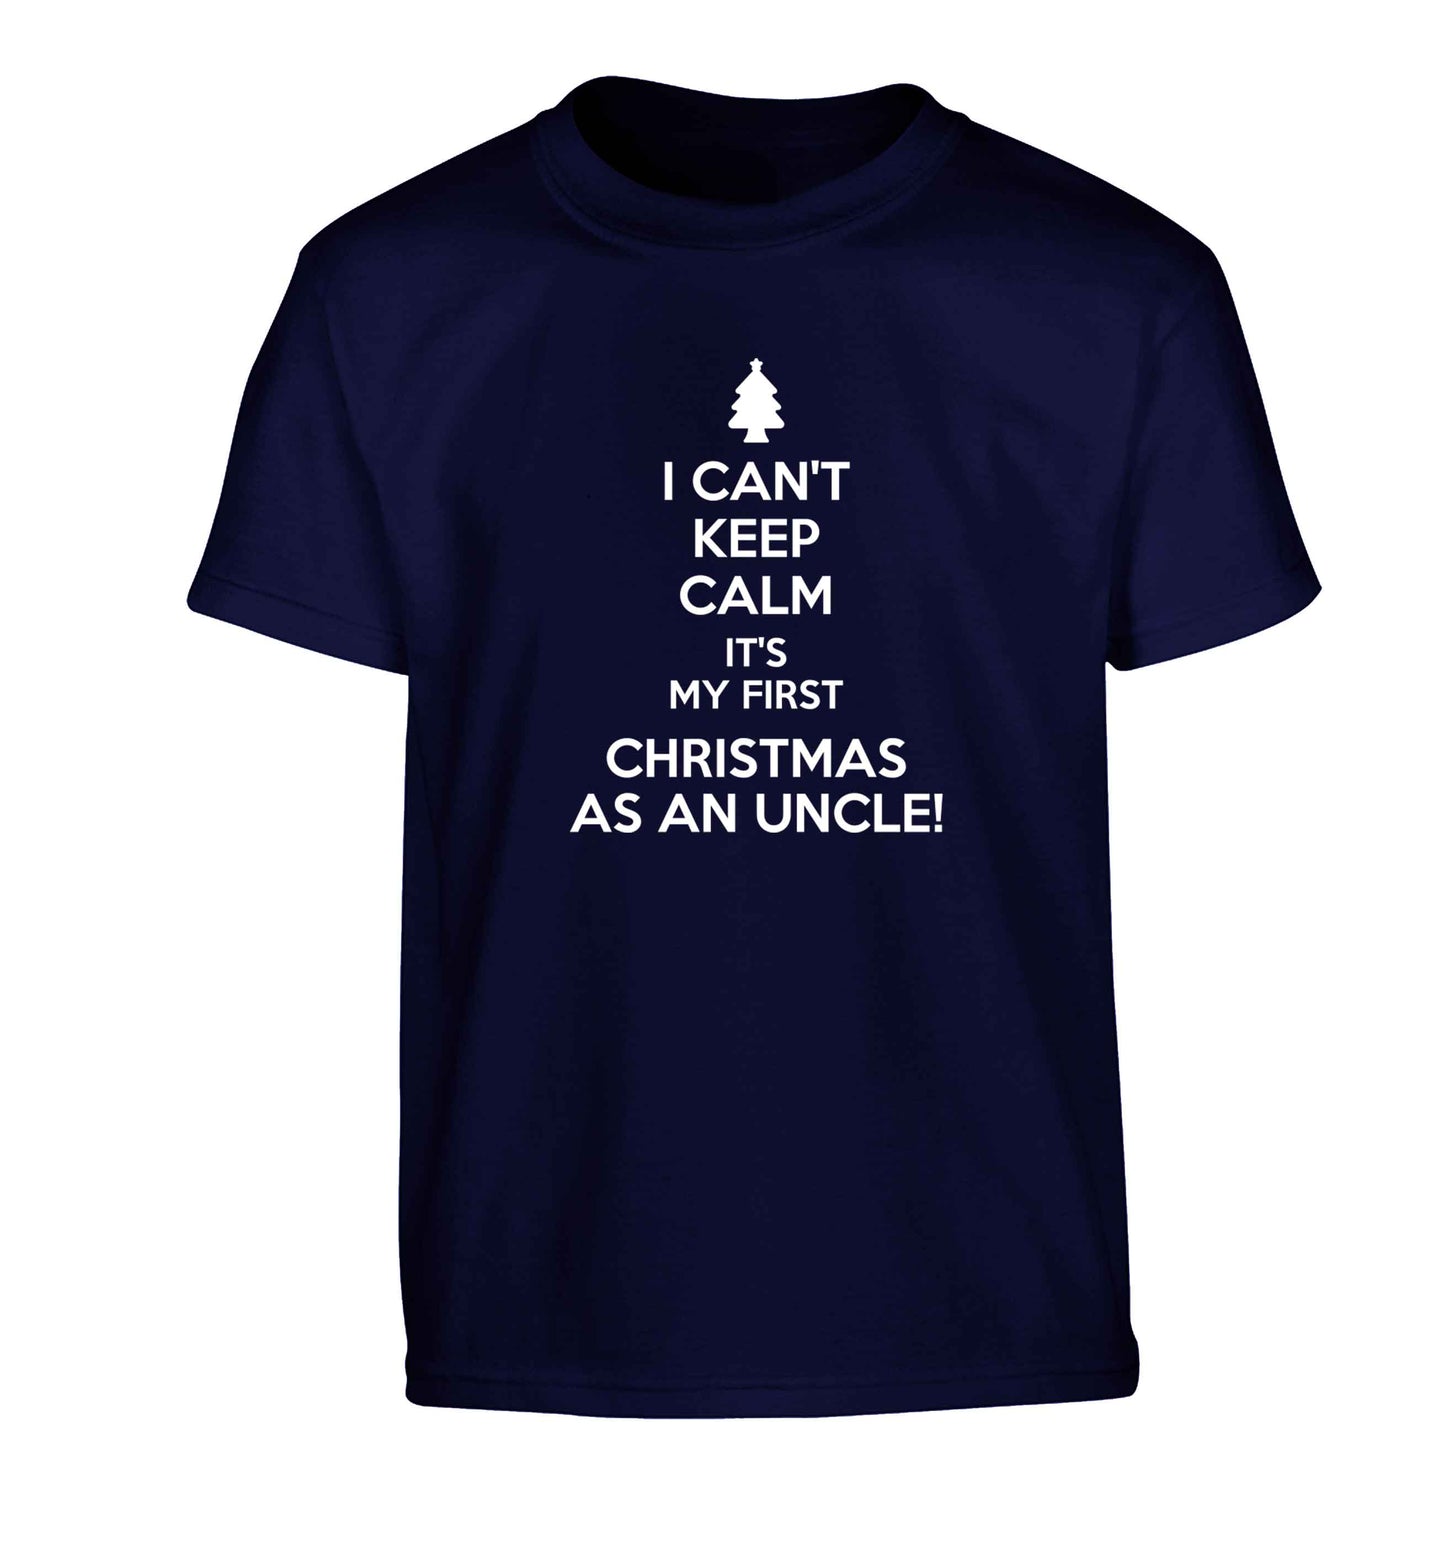 I can't keep calm it's my first Christmas as an uncle! Children's navy Tshirt 12-13 Years